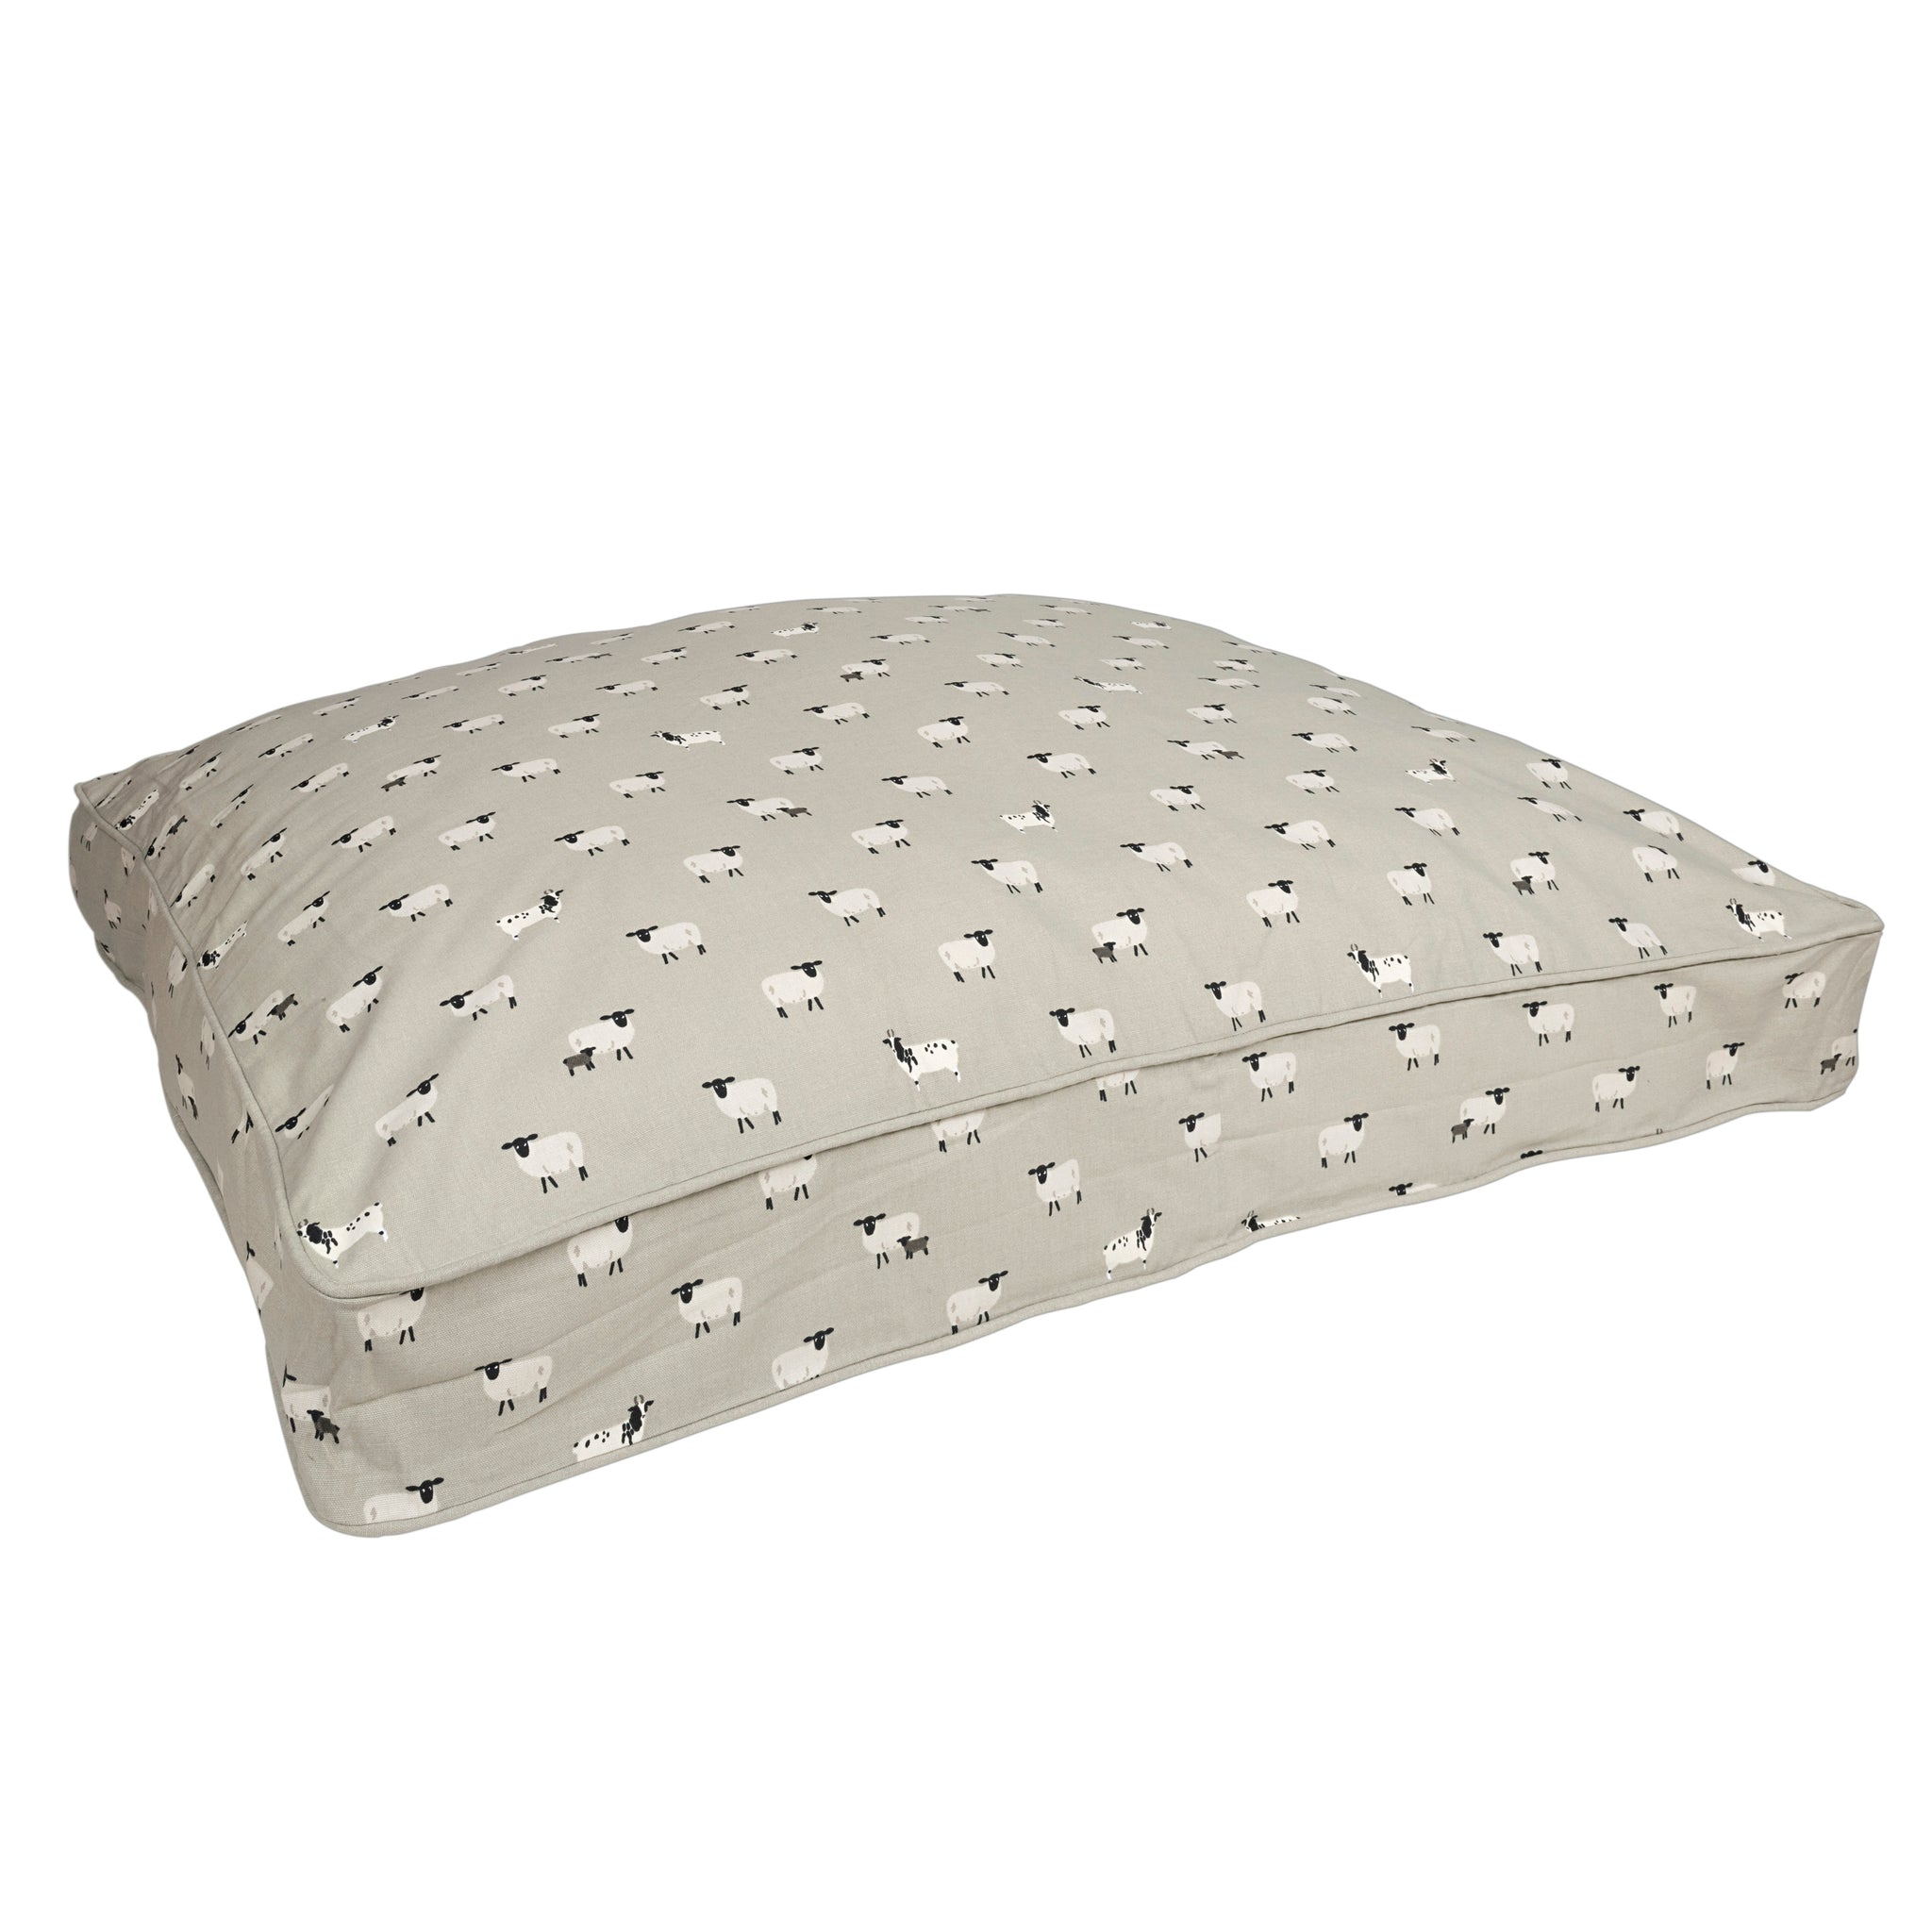 Sheep Pet Bed Mattress by Sophie Allport